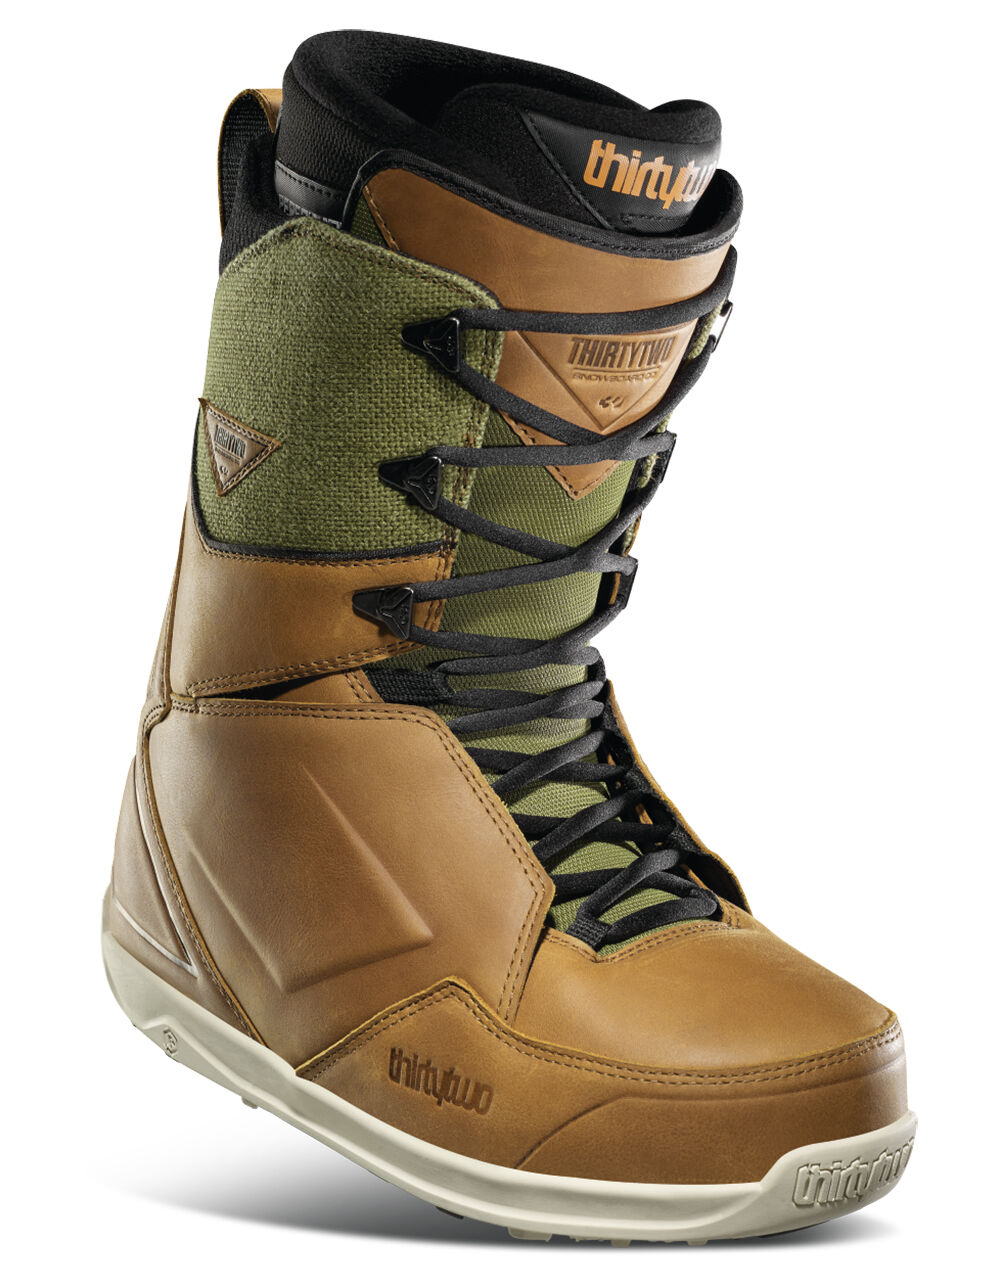 THIRTYTWO Lashed Premium Mens Snowboard Boots - BROWN | Tillys